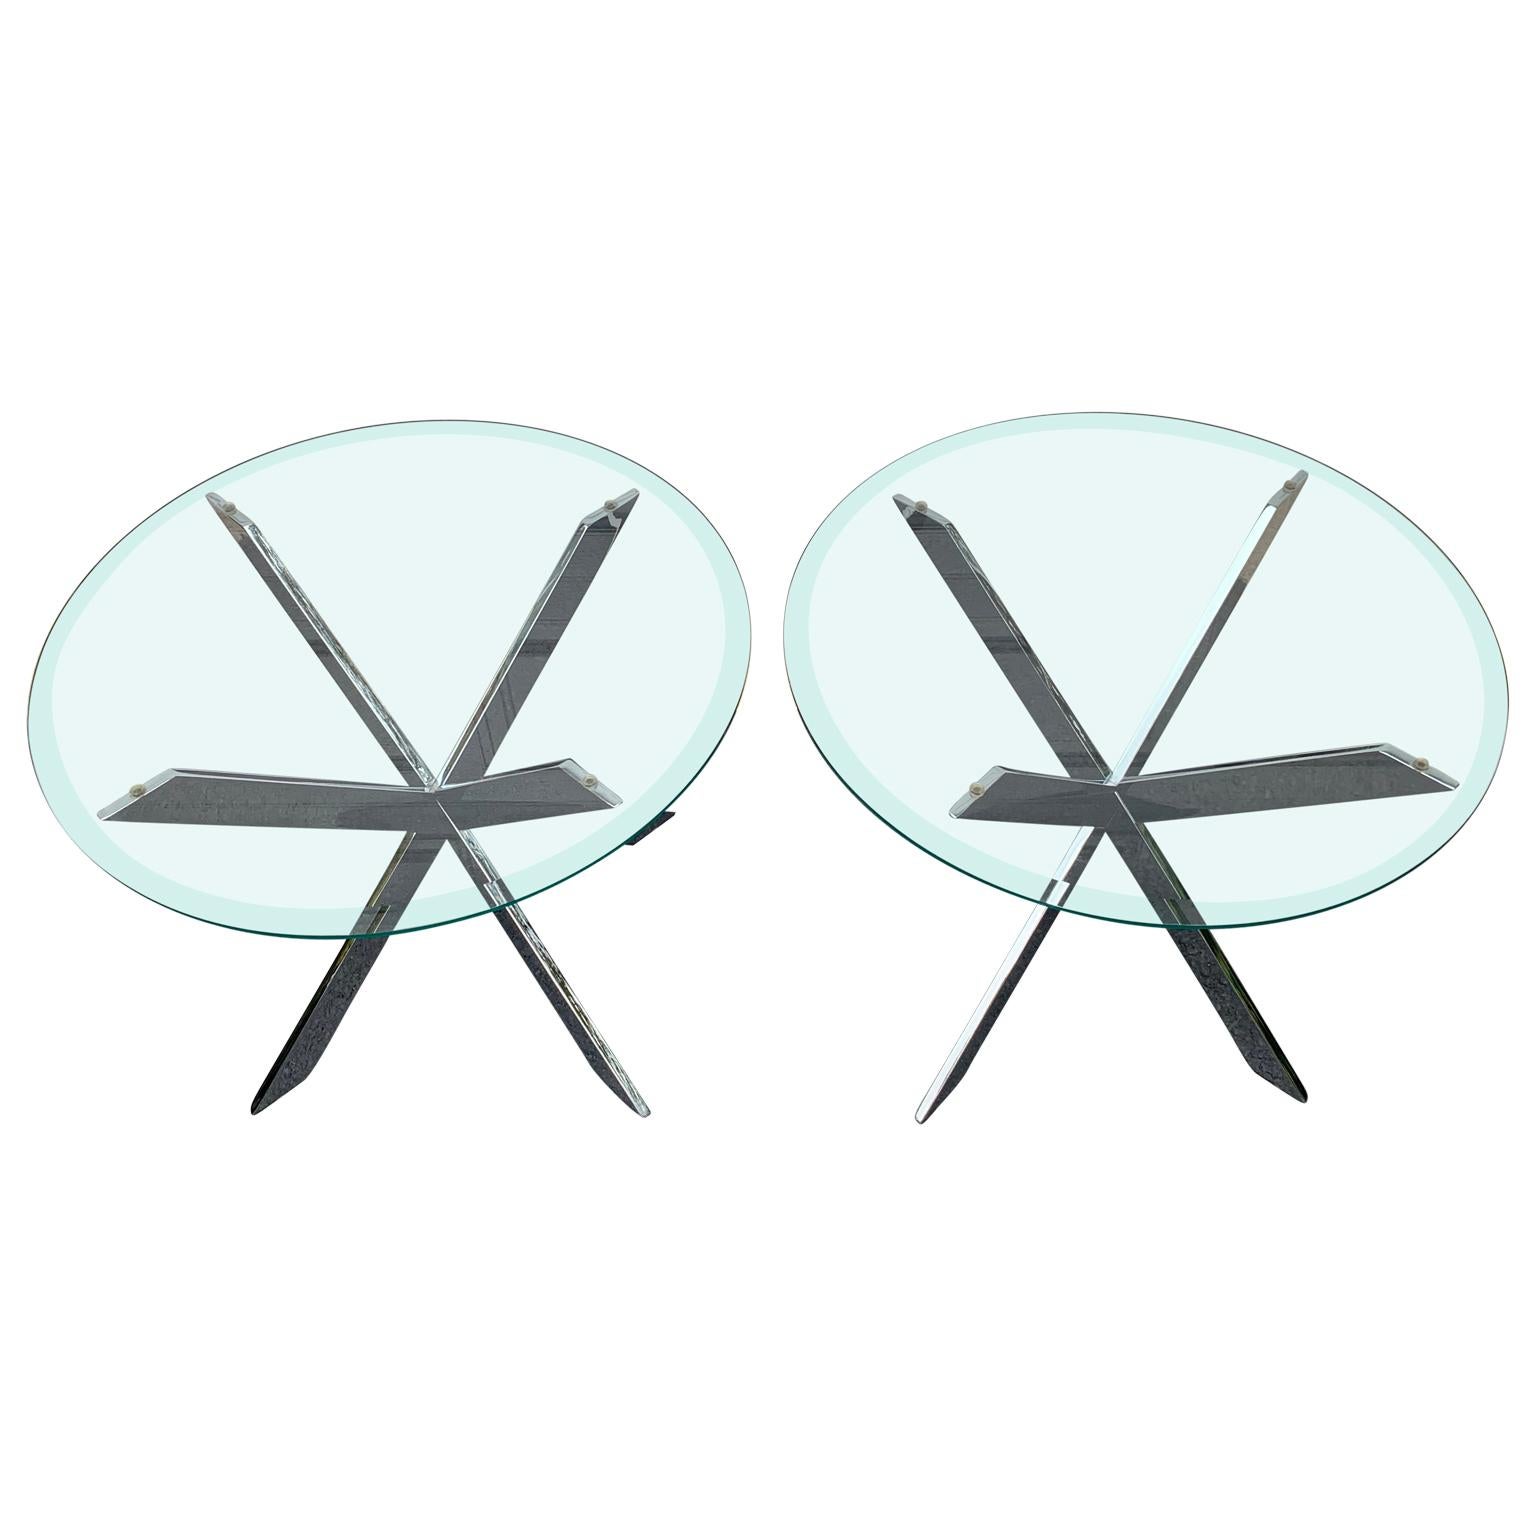 Brueton Popsicle Chrome Side or End Tables, Pair
The tables are iconic 1970's modern. The chrome is polished and heavy. They are the perfect addition to any modern decor. Please note that the table bases are offered without the glass tops as the